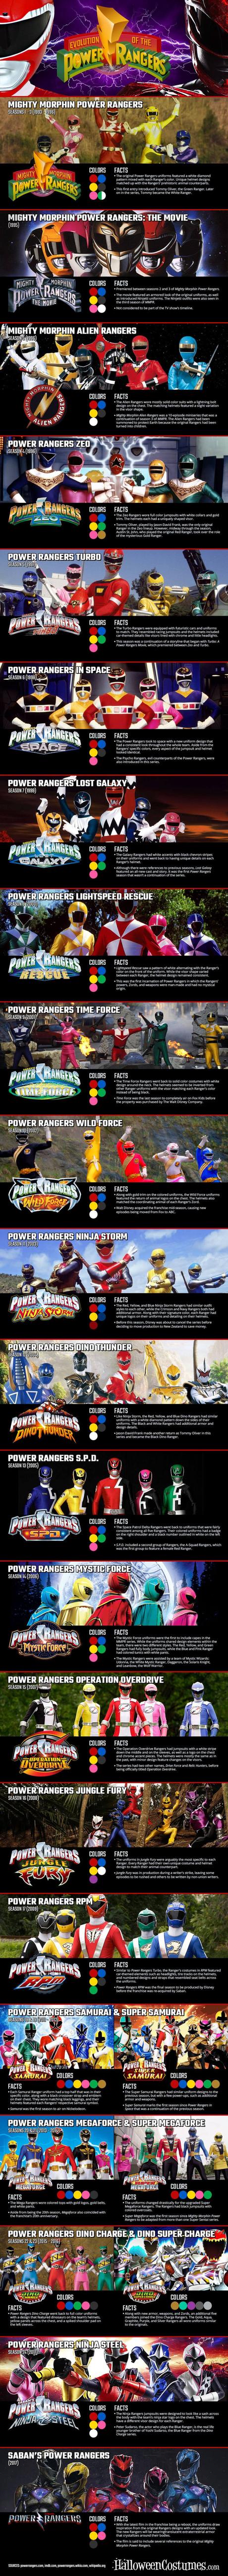 Everything You Need to Know About the Power Rangers [An Infographic]